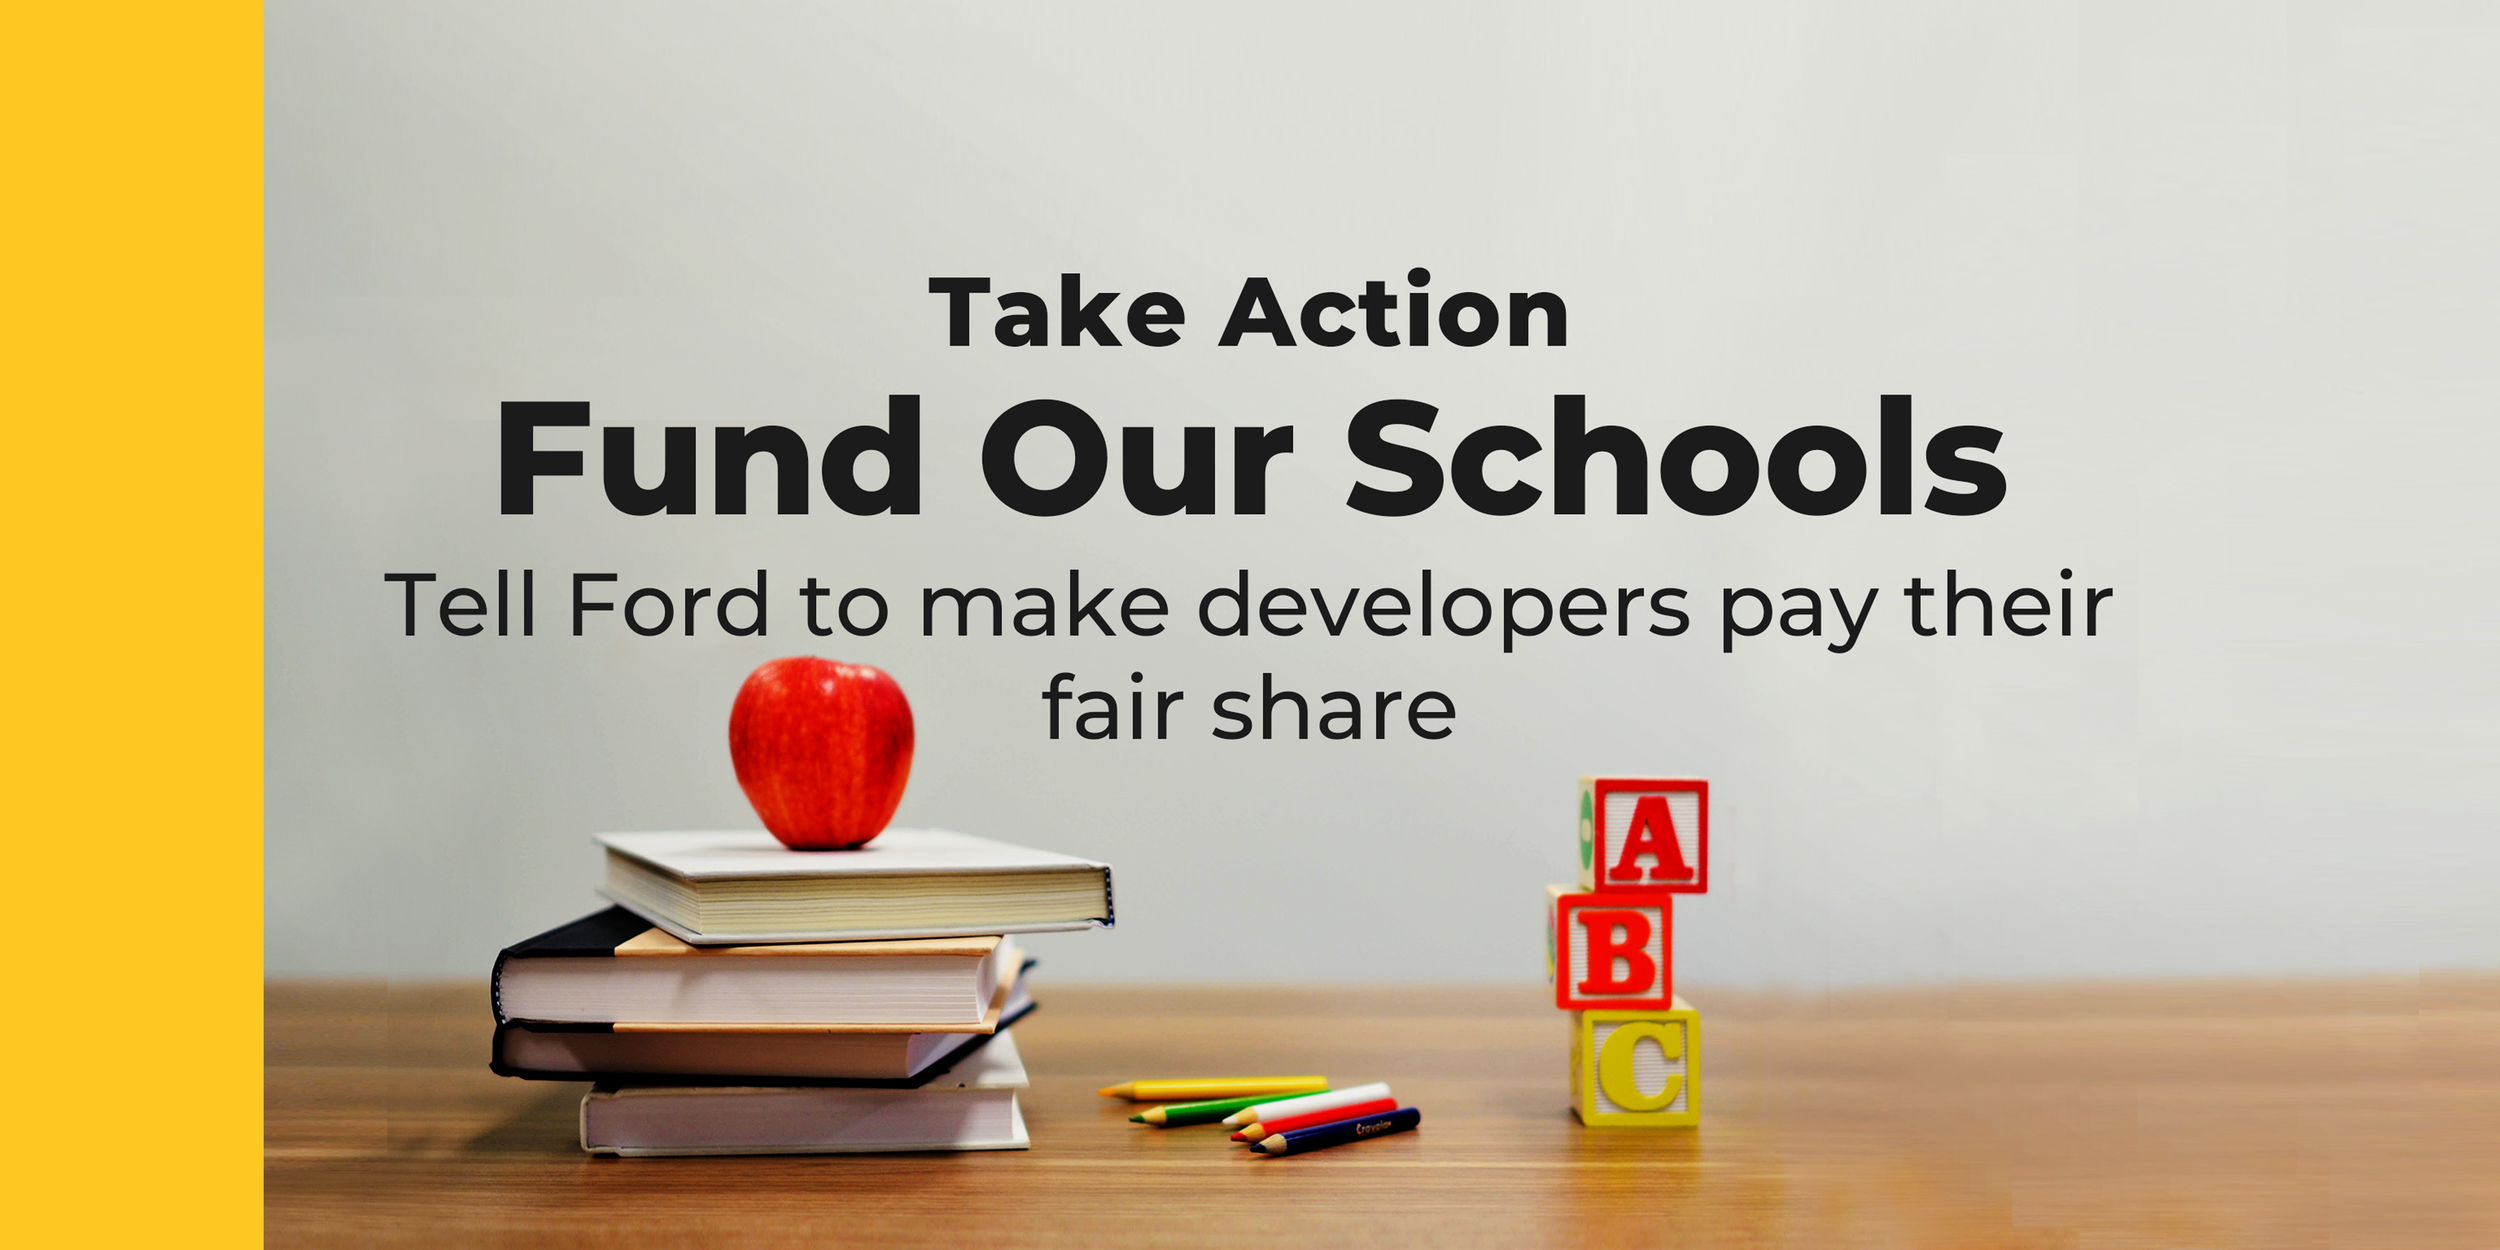 Tell Ford: Fund Our Schools